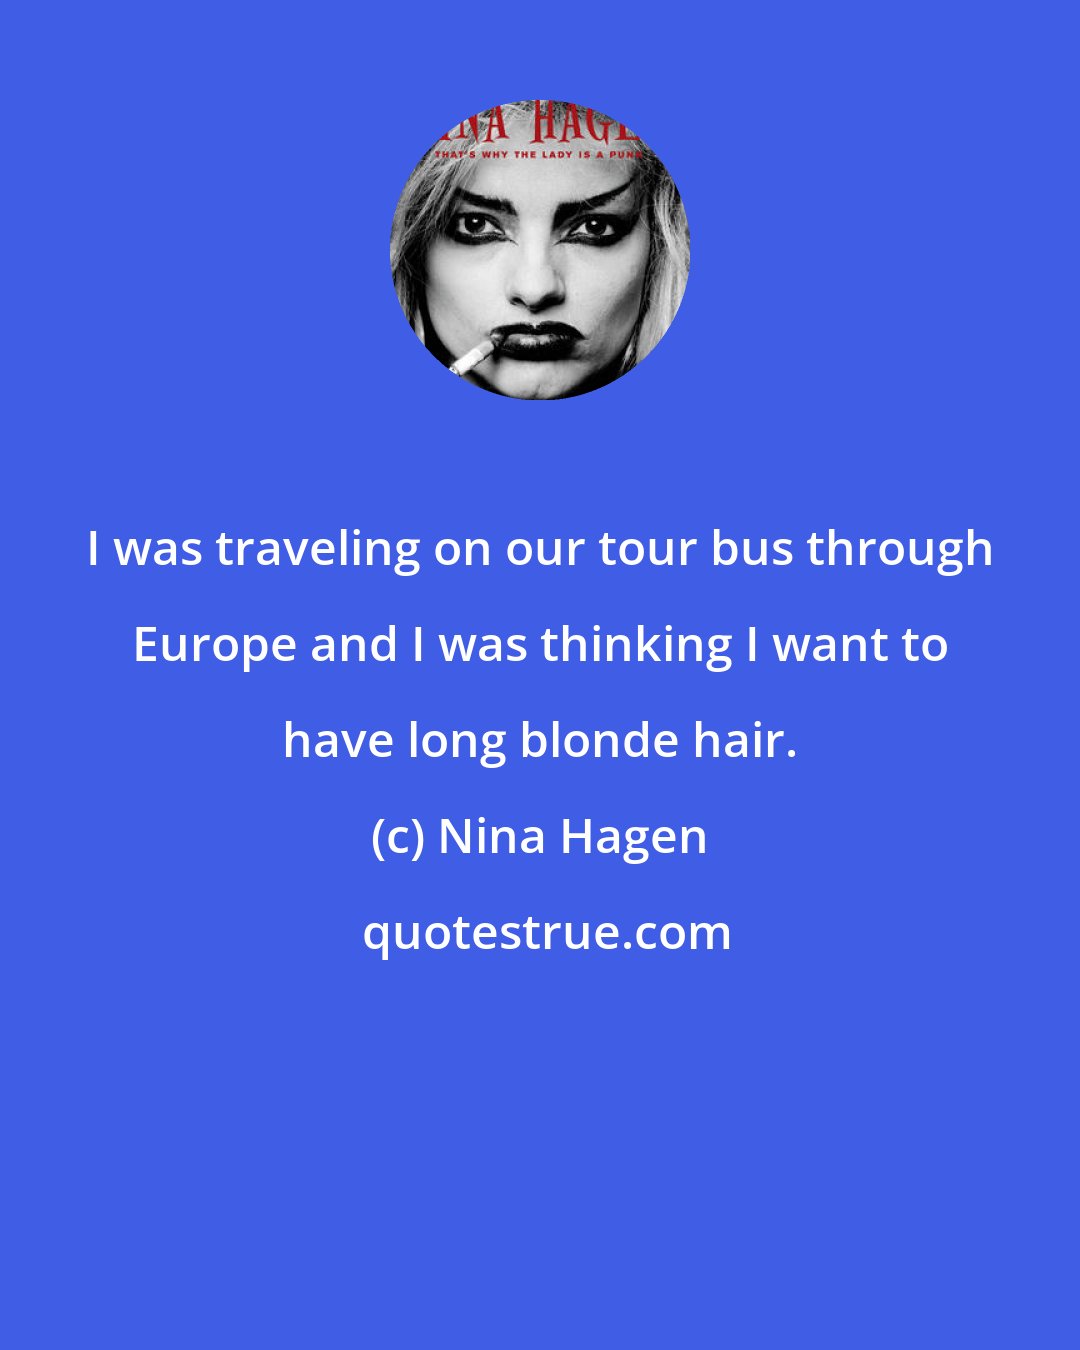 Nina Hagen: I was traveling on our tour bus through Europe and I was thinking I want to have long blonde hair.